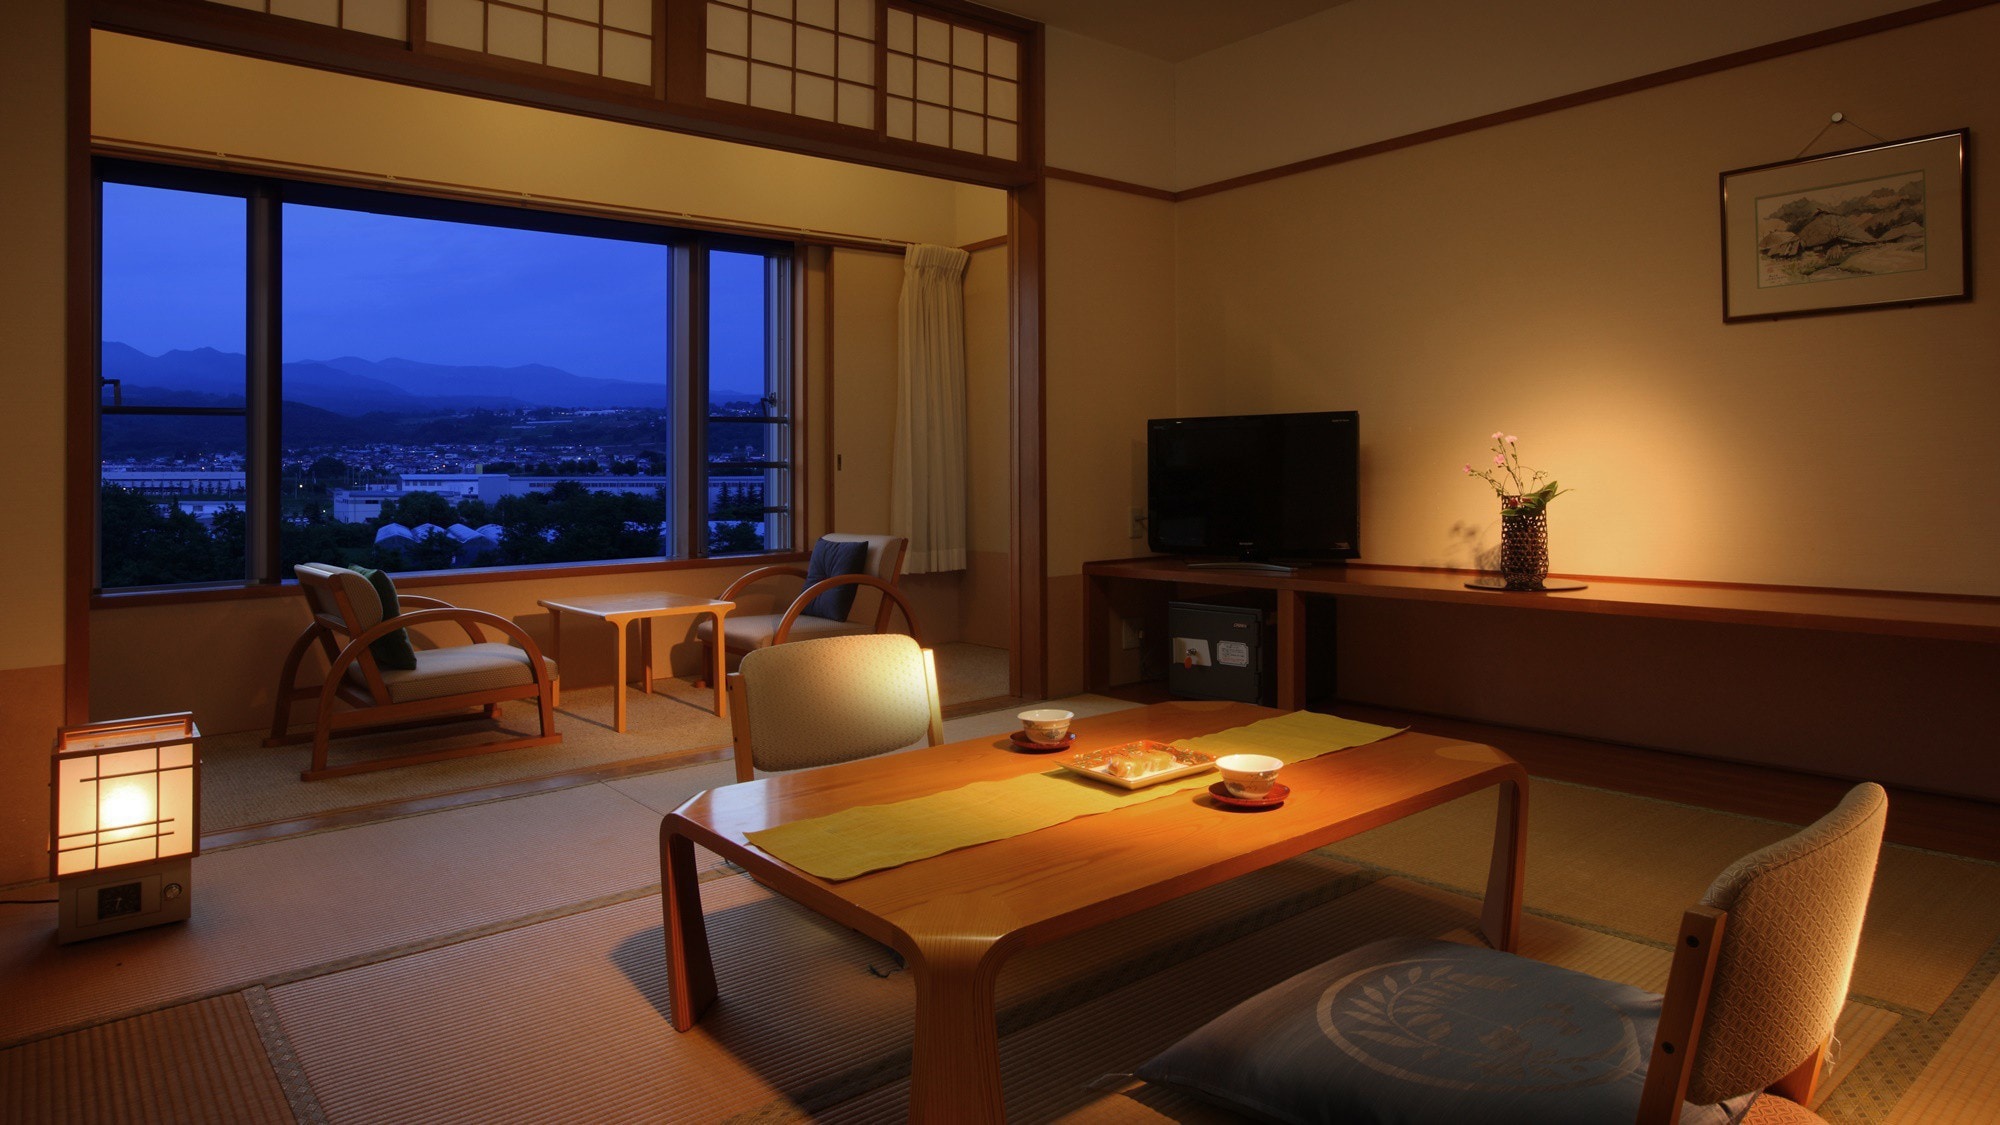 [Japanese-style room 10 tatami mats] The Zao Federation, which you can see from the trees that grow naturally along the Sugawa River, shows seasonal expressions and is popular with customers.